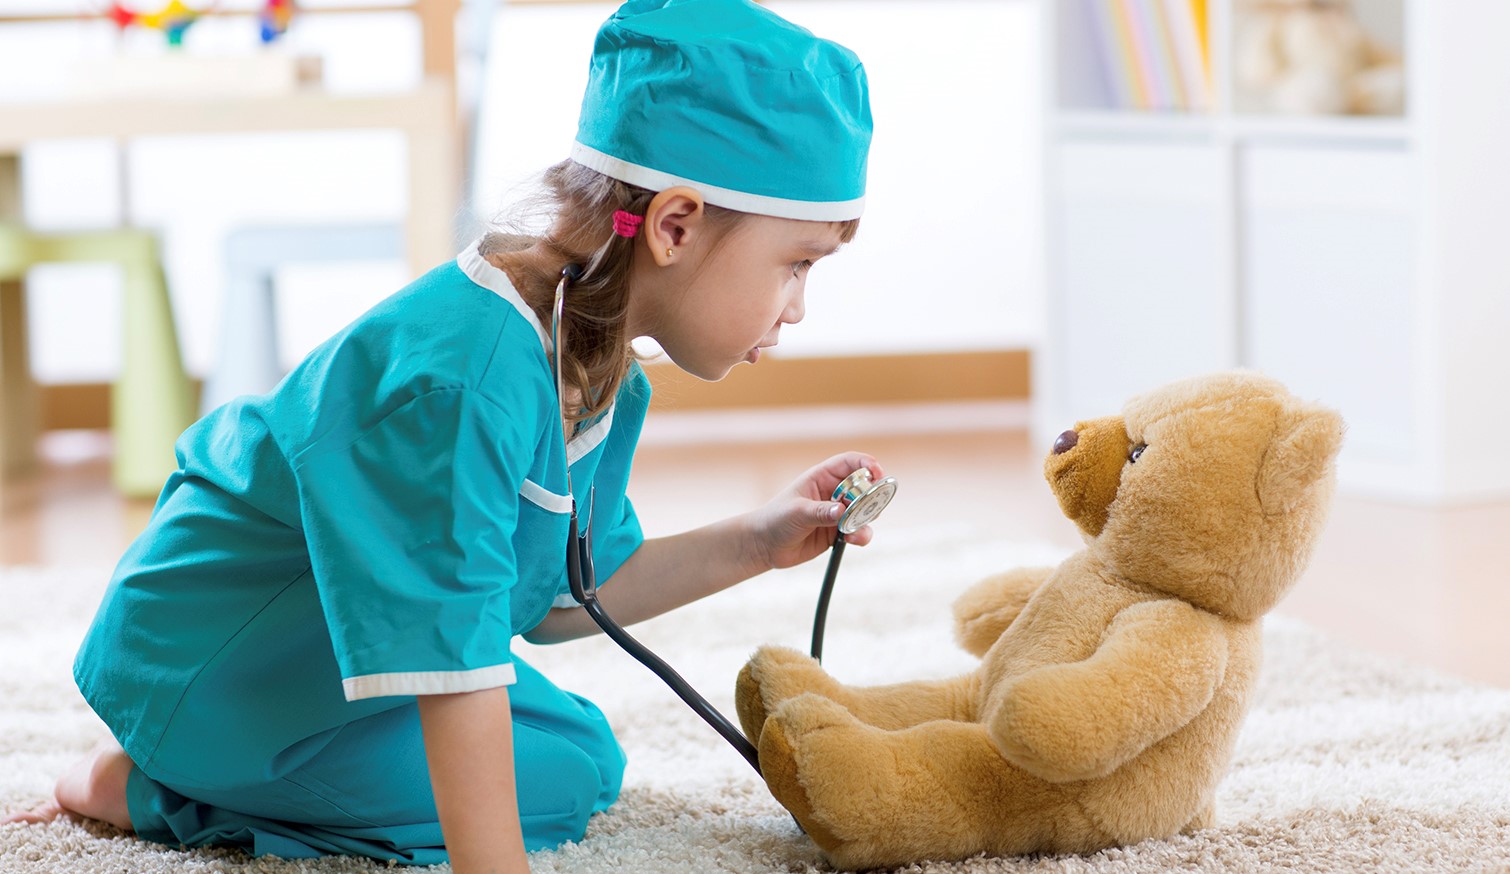 Stethoscope, scrubs, stuffed toy-as-patient: many of us grew up with toy medical equipment. How many of us had a toy AED?